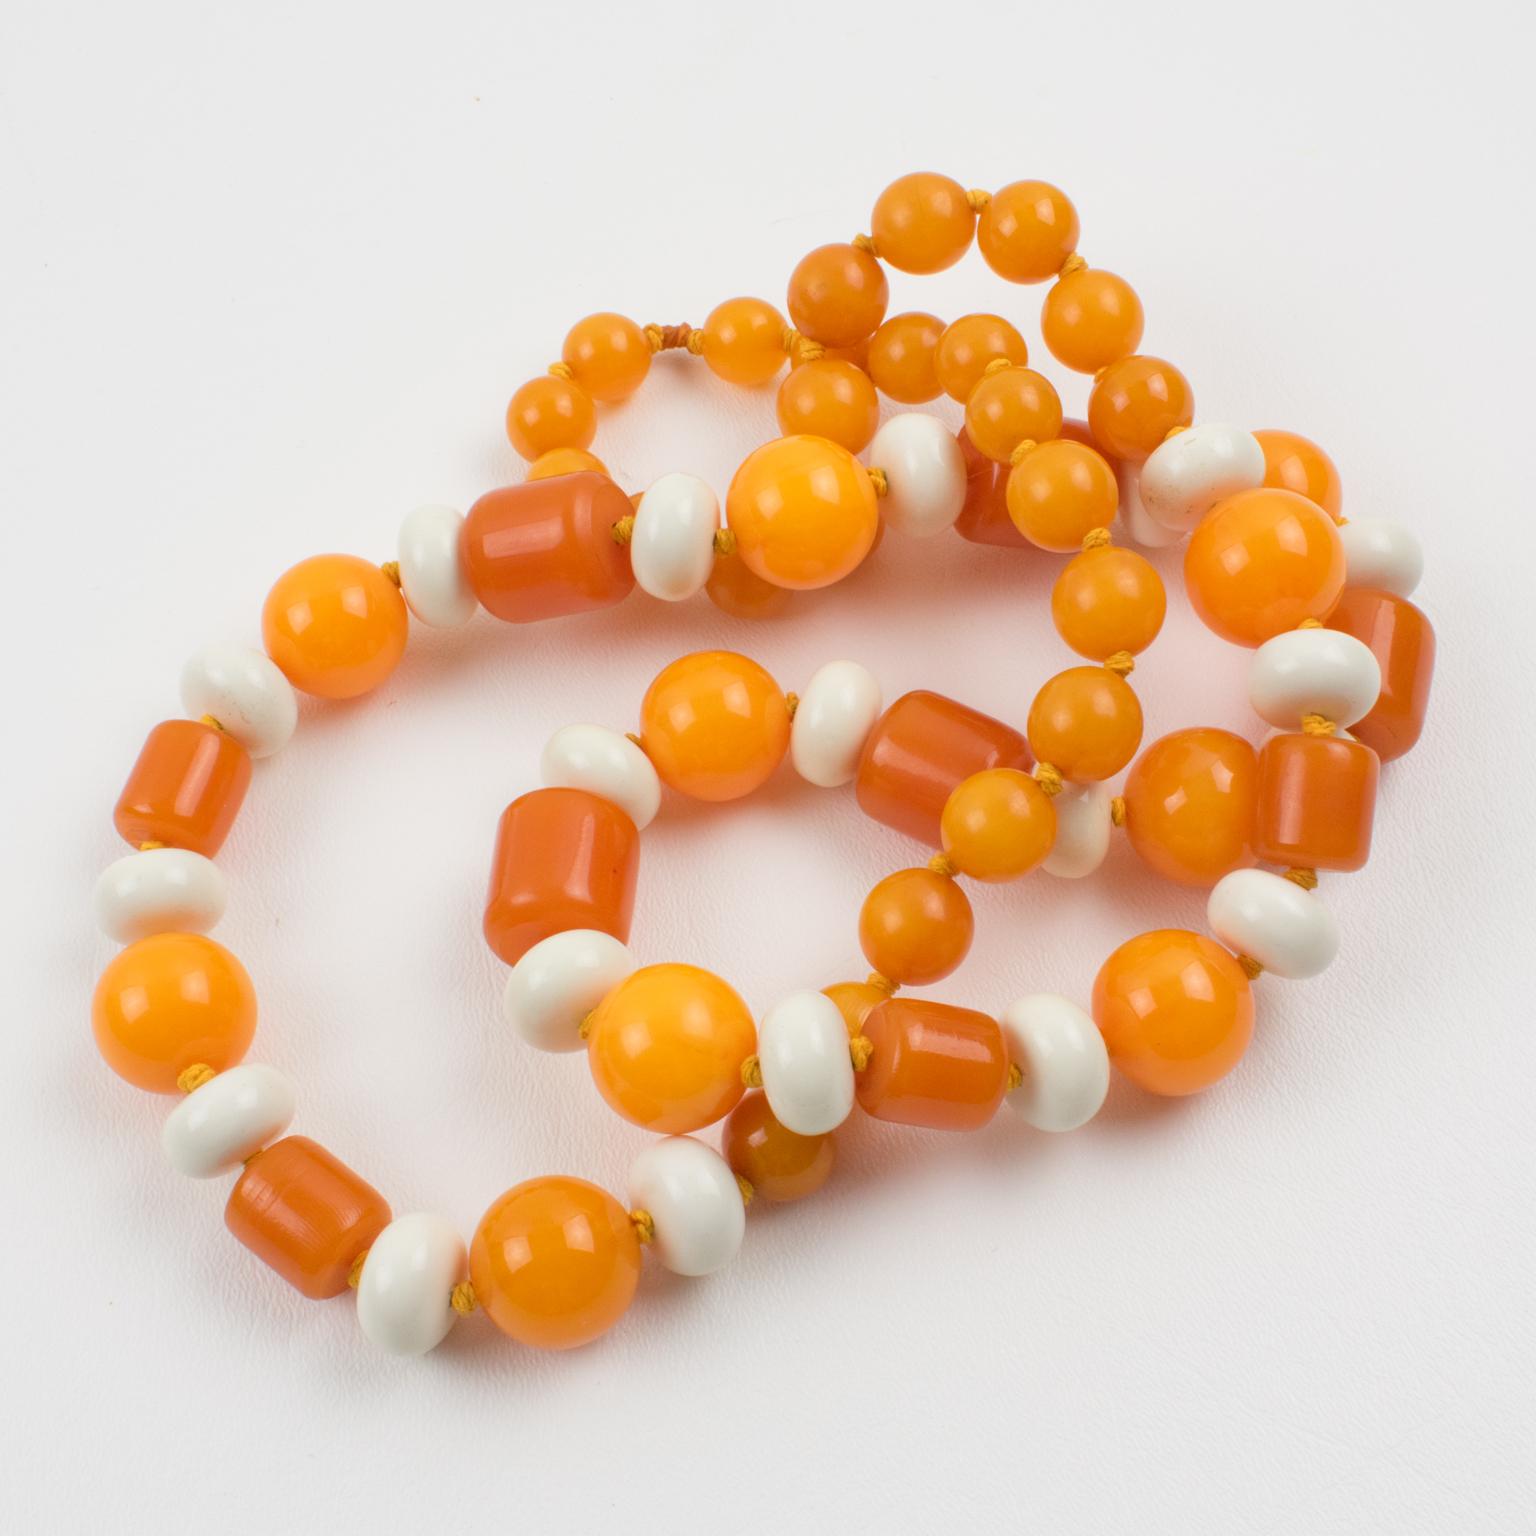 Bakelite and Lucite Long Necklace Orange and White Colors In Excellent Condition For Sale In Atlanta, GA